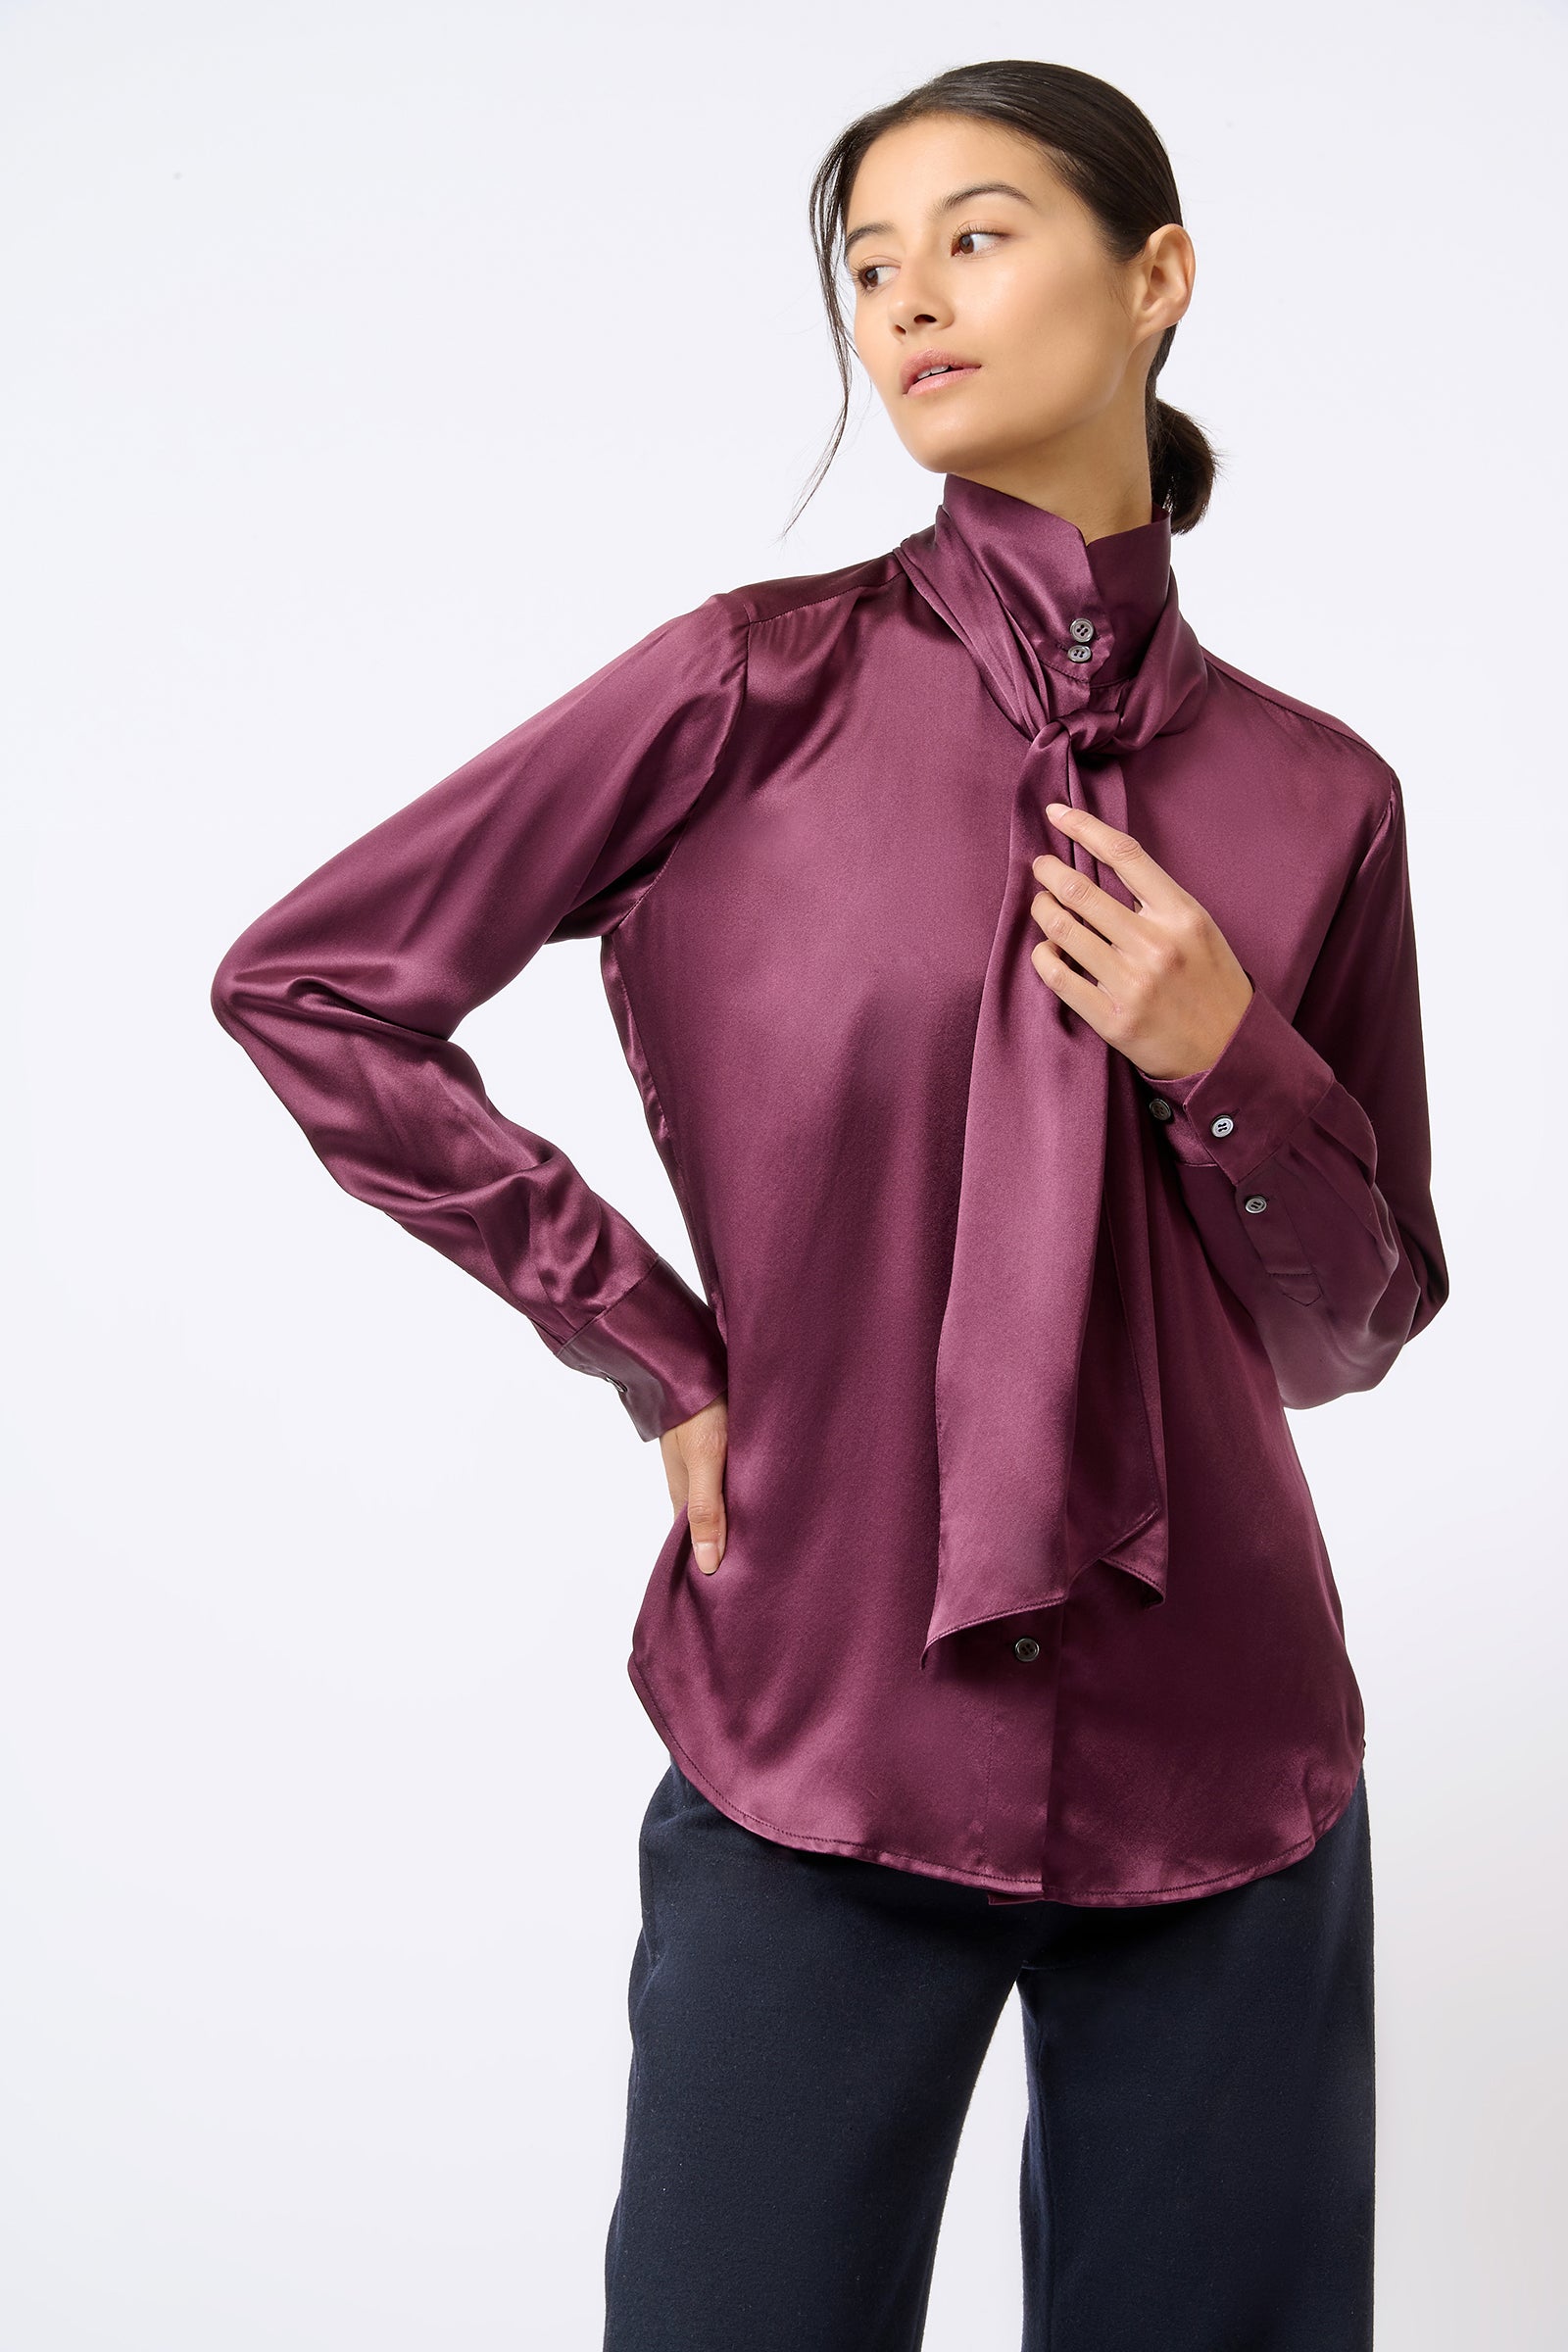 Kal Rieman Scarf Tie Blouse in Bordeaux on Model with Hand on Scarf Front View